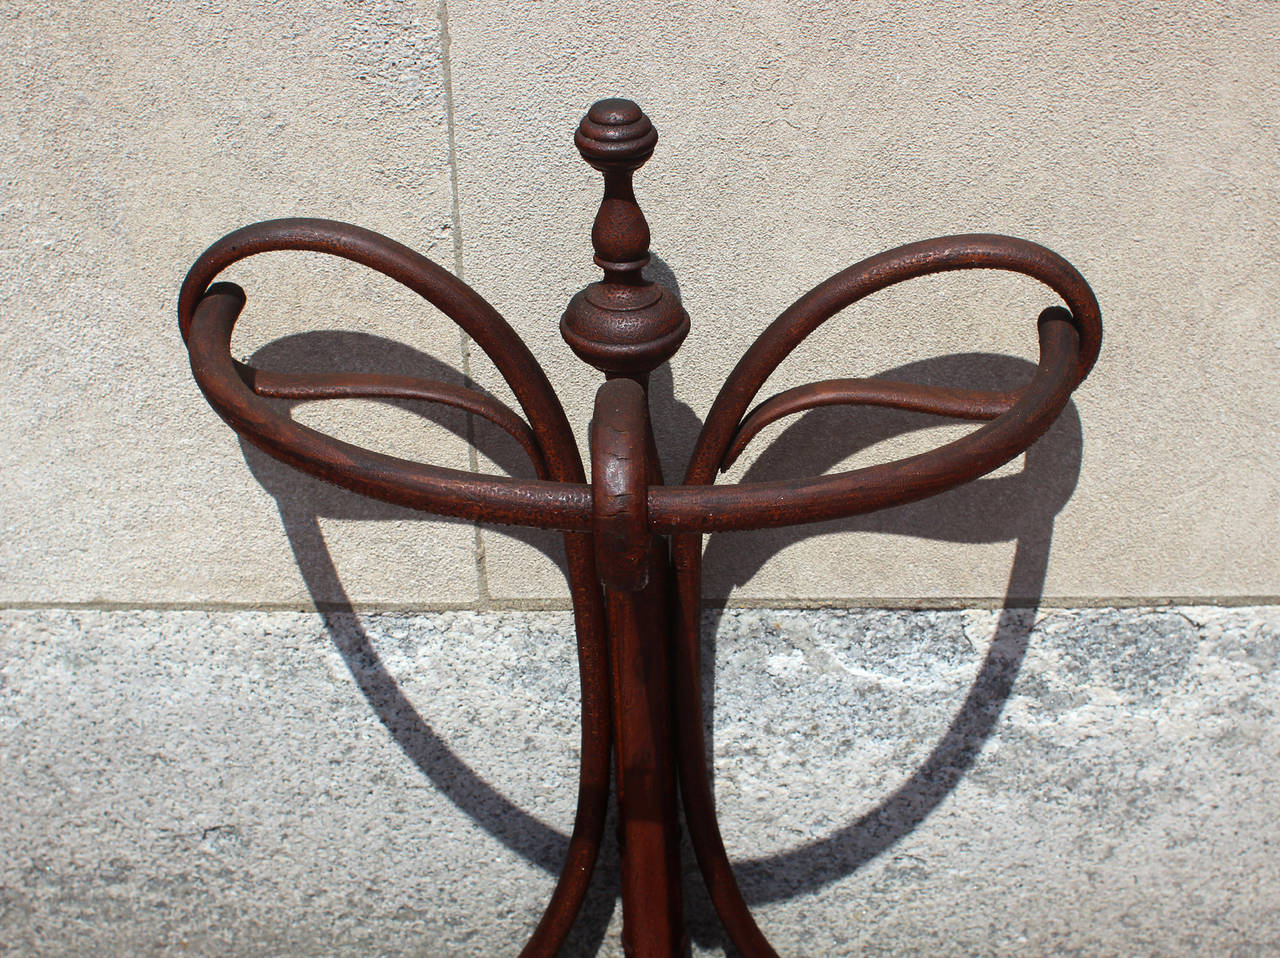 Very good bentwood umbrella stand with handsome swooping features, turnings and excellent patina; late 19th century. Great upright pilaster. Original tin tray.